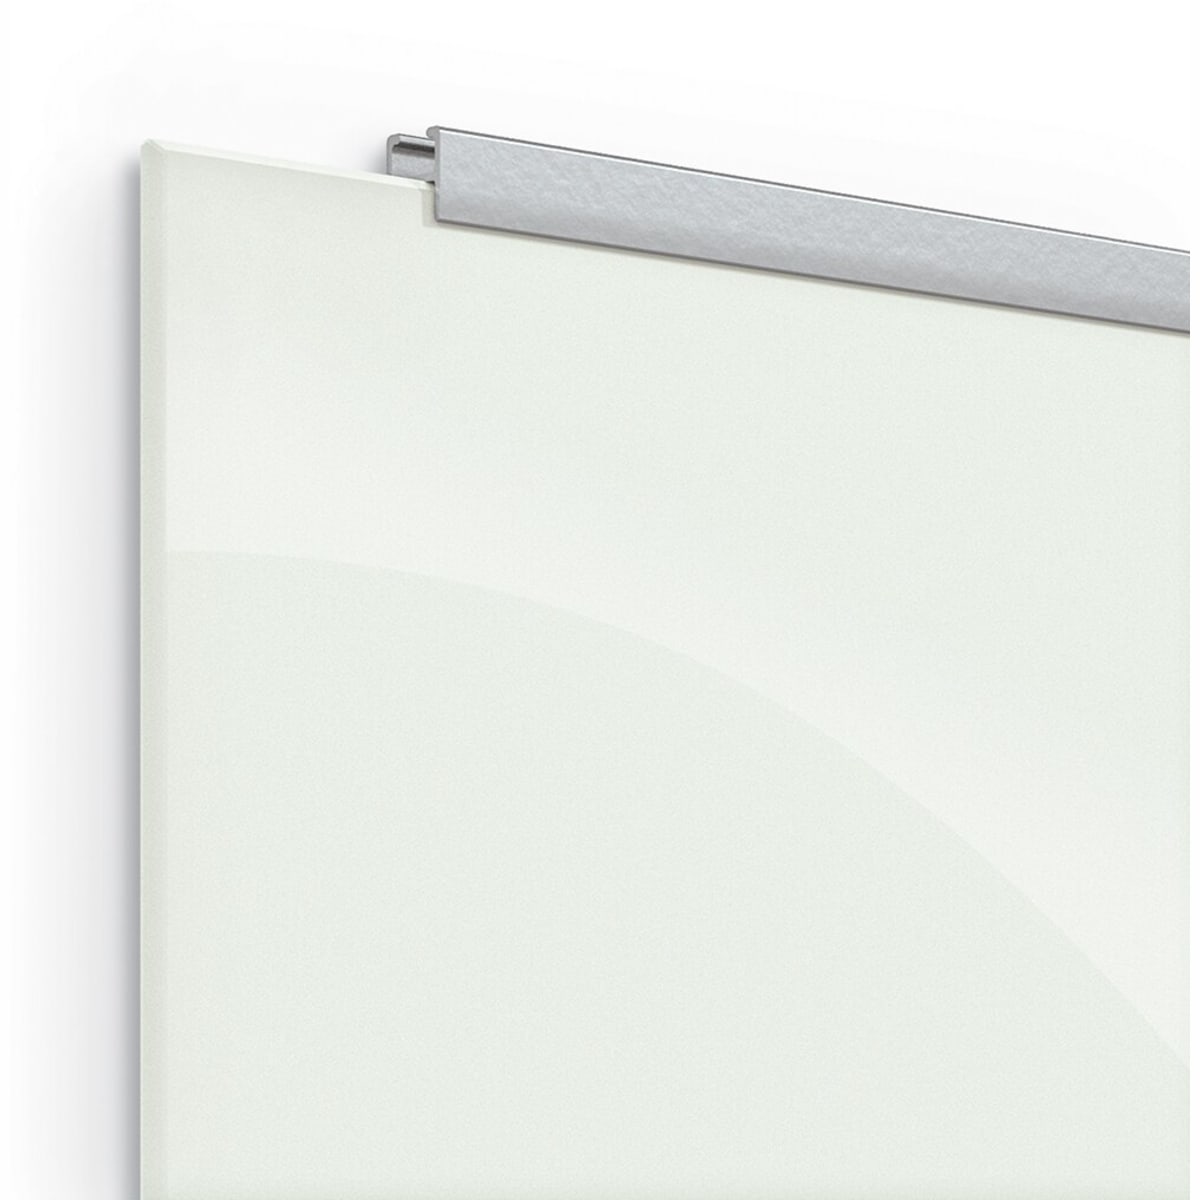 Mooreco 3'W X 2'H - Visionary Magnetic Glass Dry Erase Whiteboard with Exo Tray System - Glossy White (Mooreco 83843-1X576) - SchoolOutlet